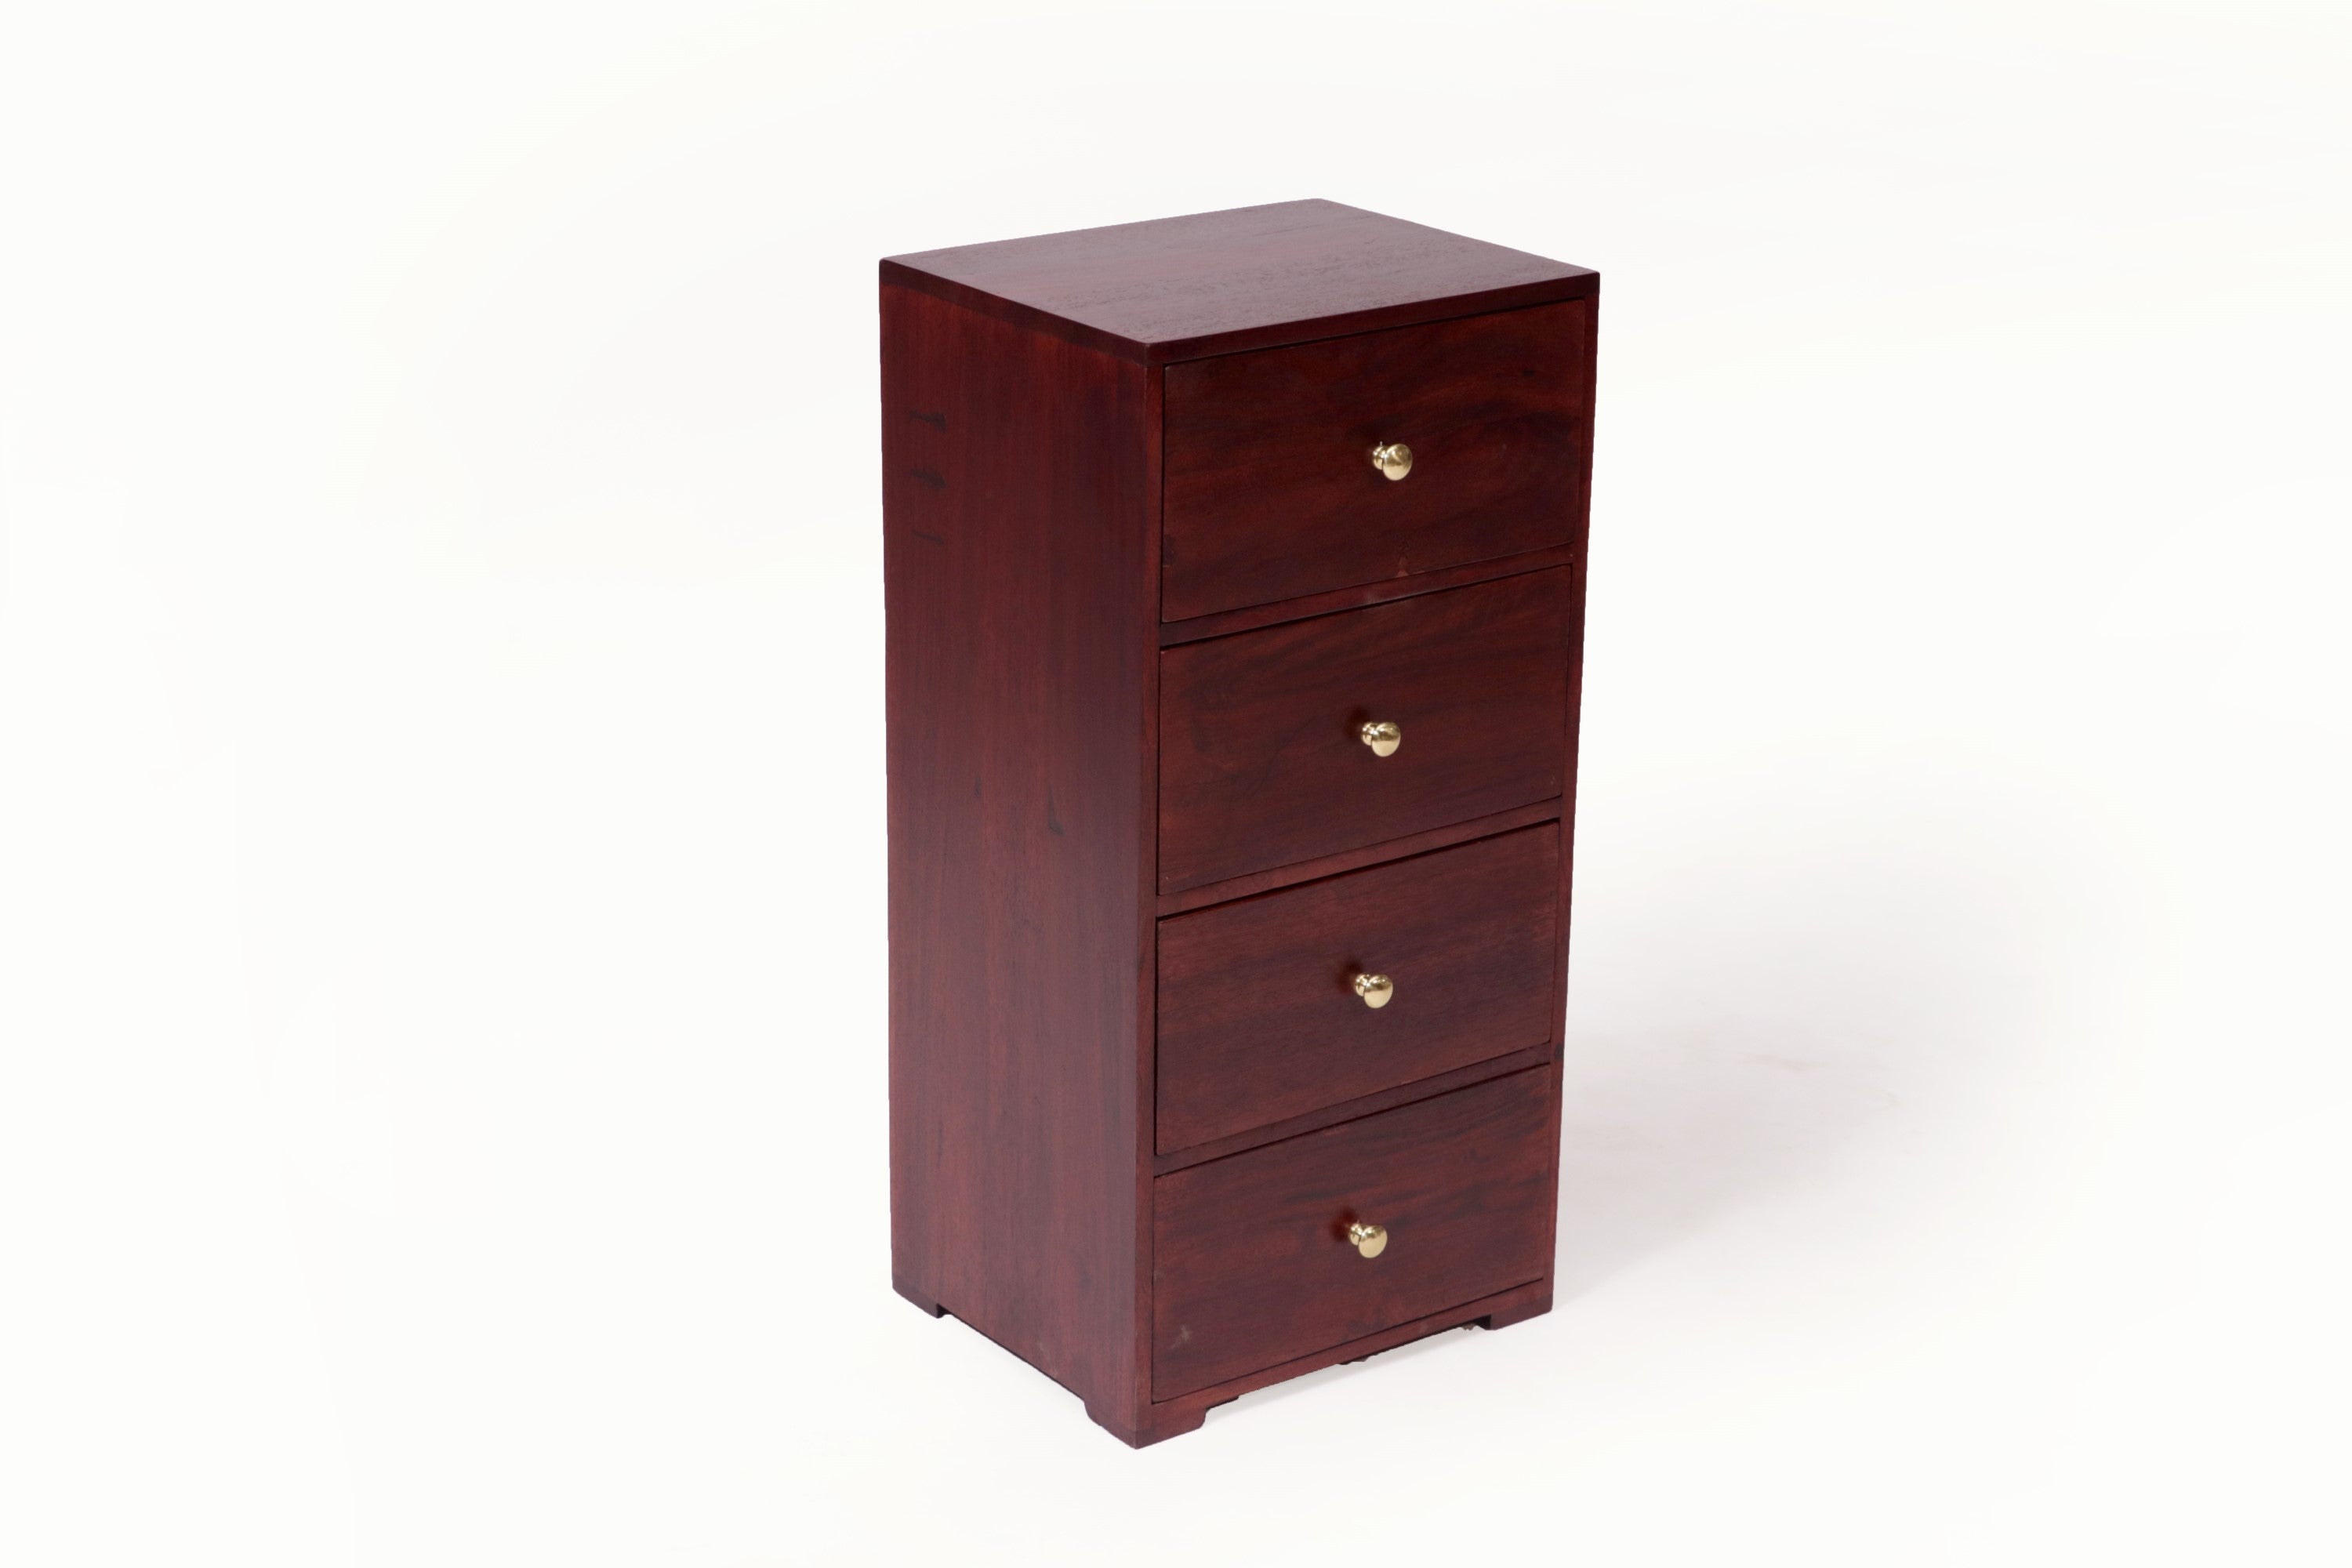 4 Drawer Tower Wooden Chest Drawer's Chest